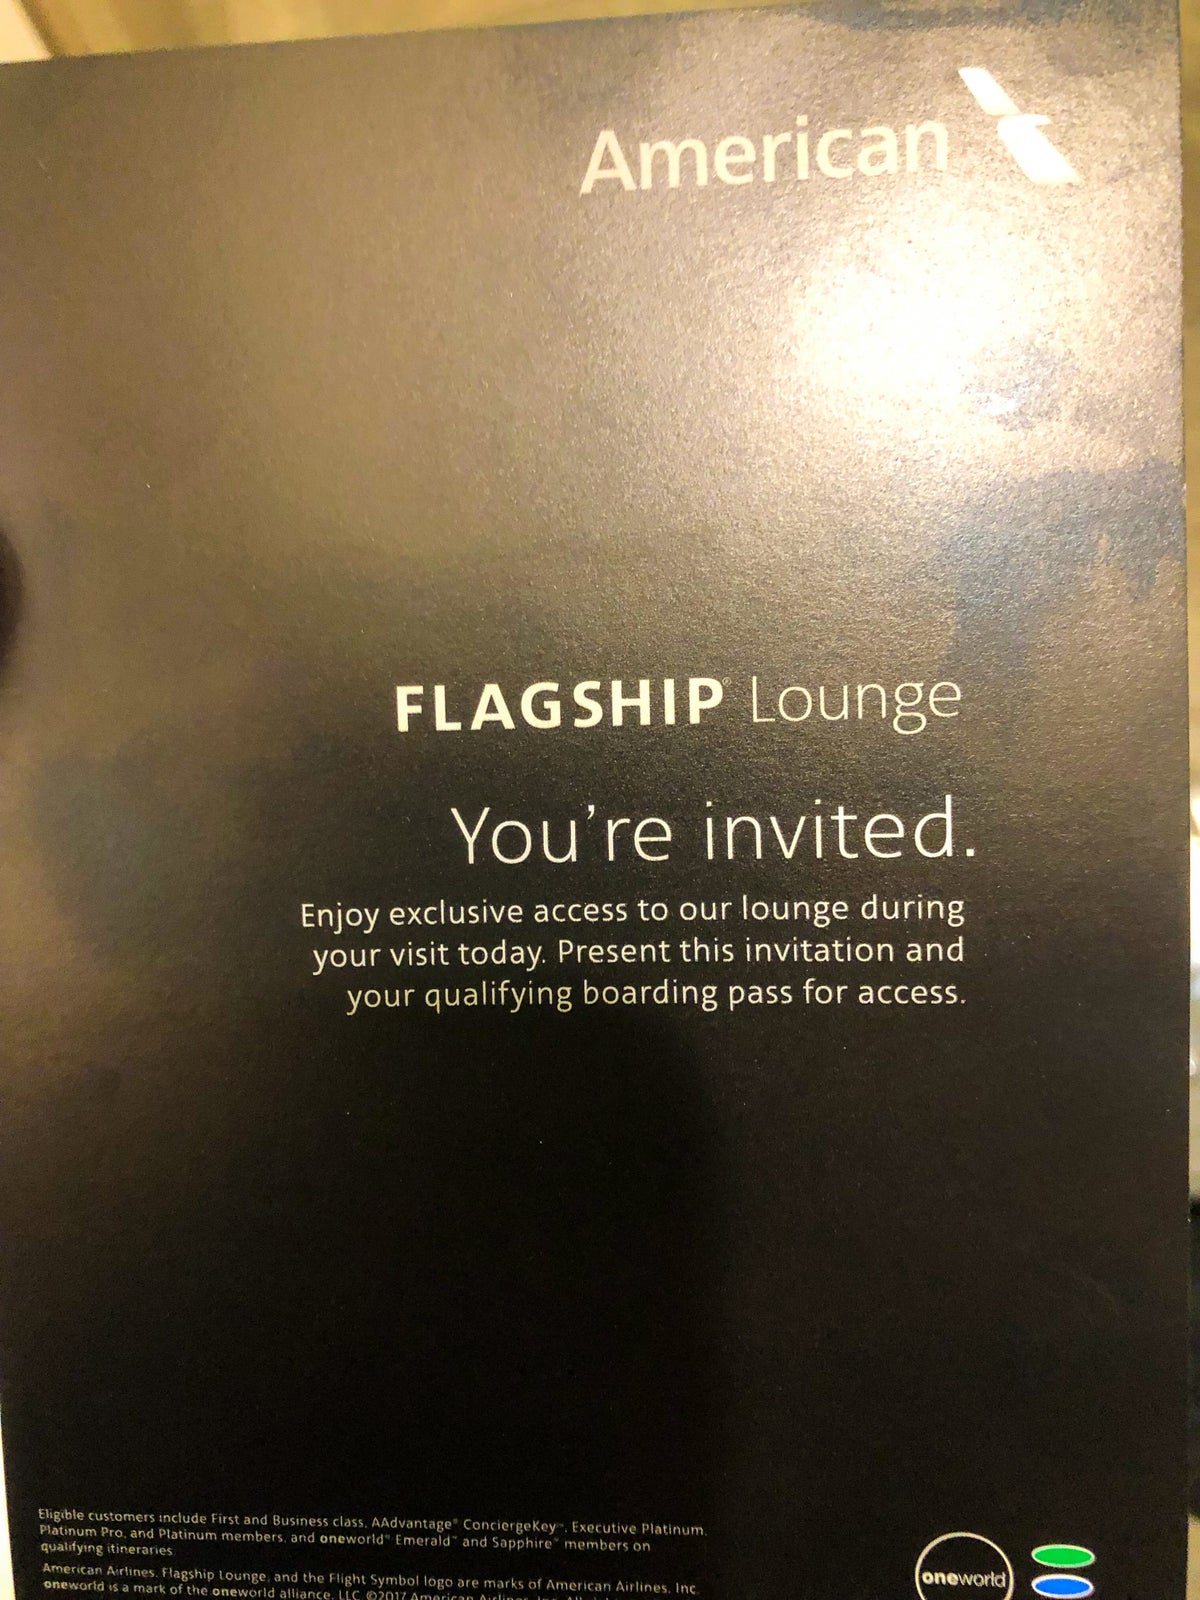 American Airlines Flagship Lounge LAX invitation card